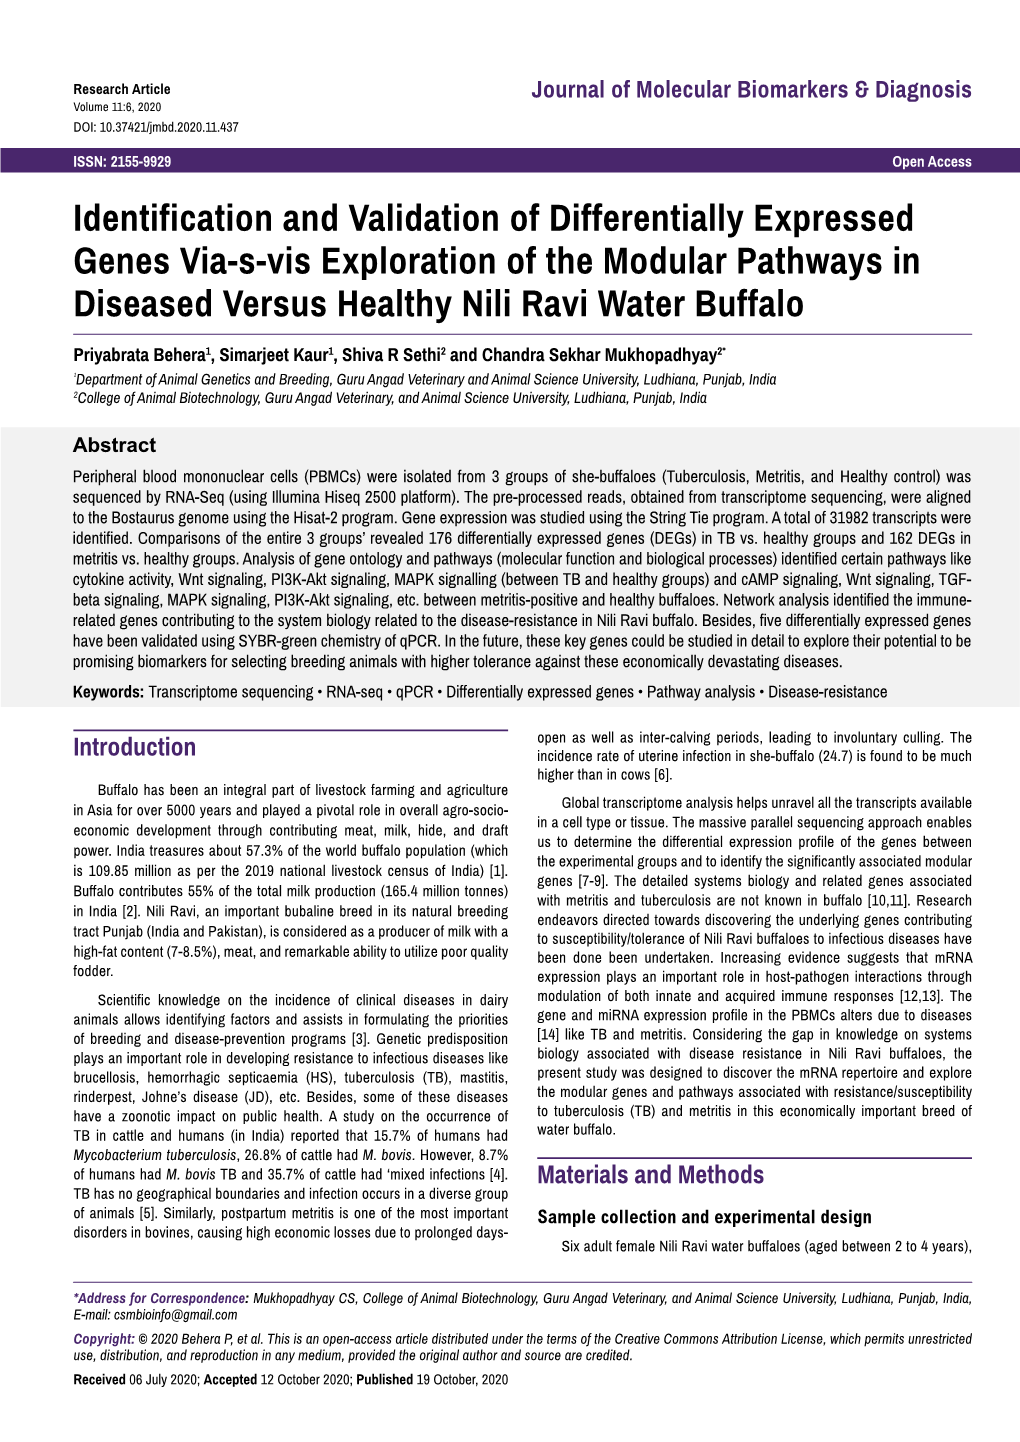 Identification and Validation of Differentially Expressed Genes Via-S-Vis Exploration of the Modular Pathways in Diseased Versus Healthy Nili Ravi Water Buffalo